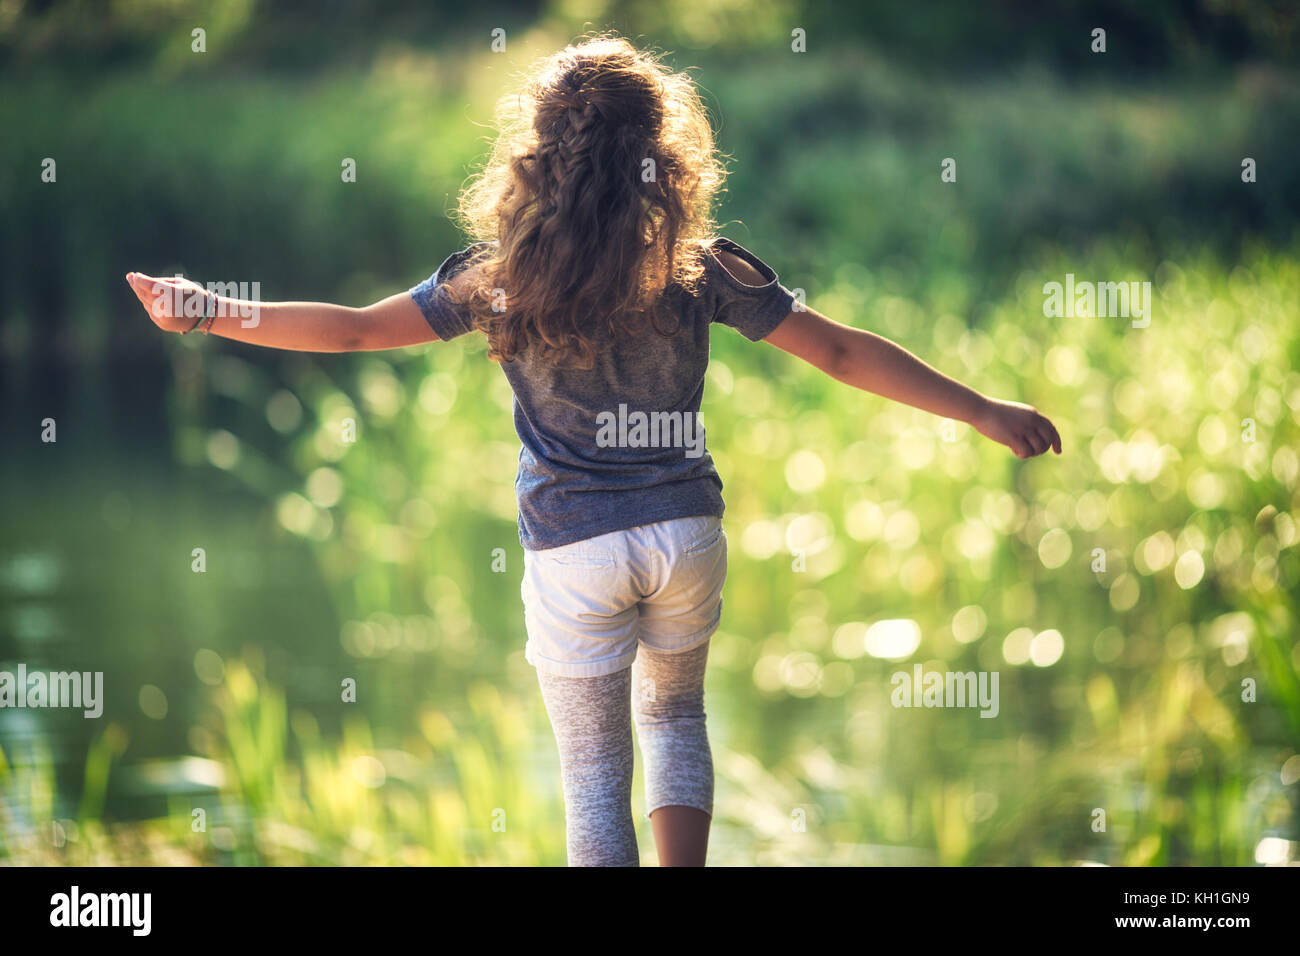 Happy little girl enjoying the nature and the sunny day in the park Stock Photo